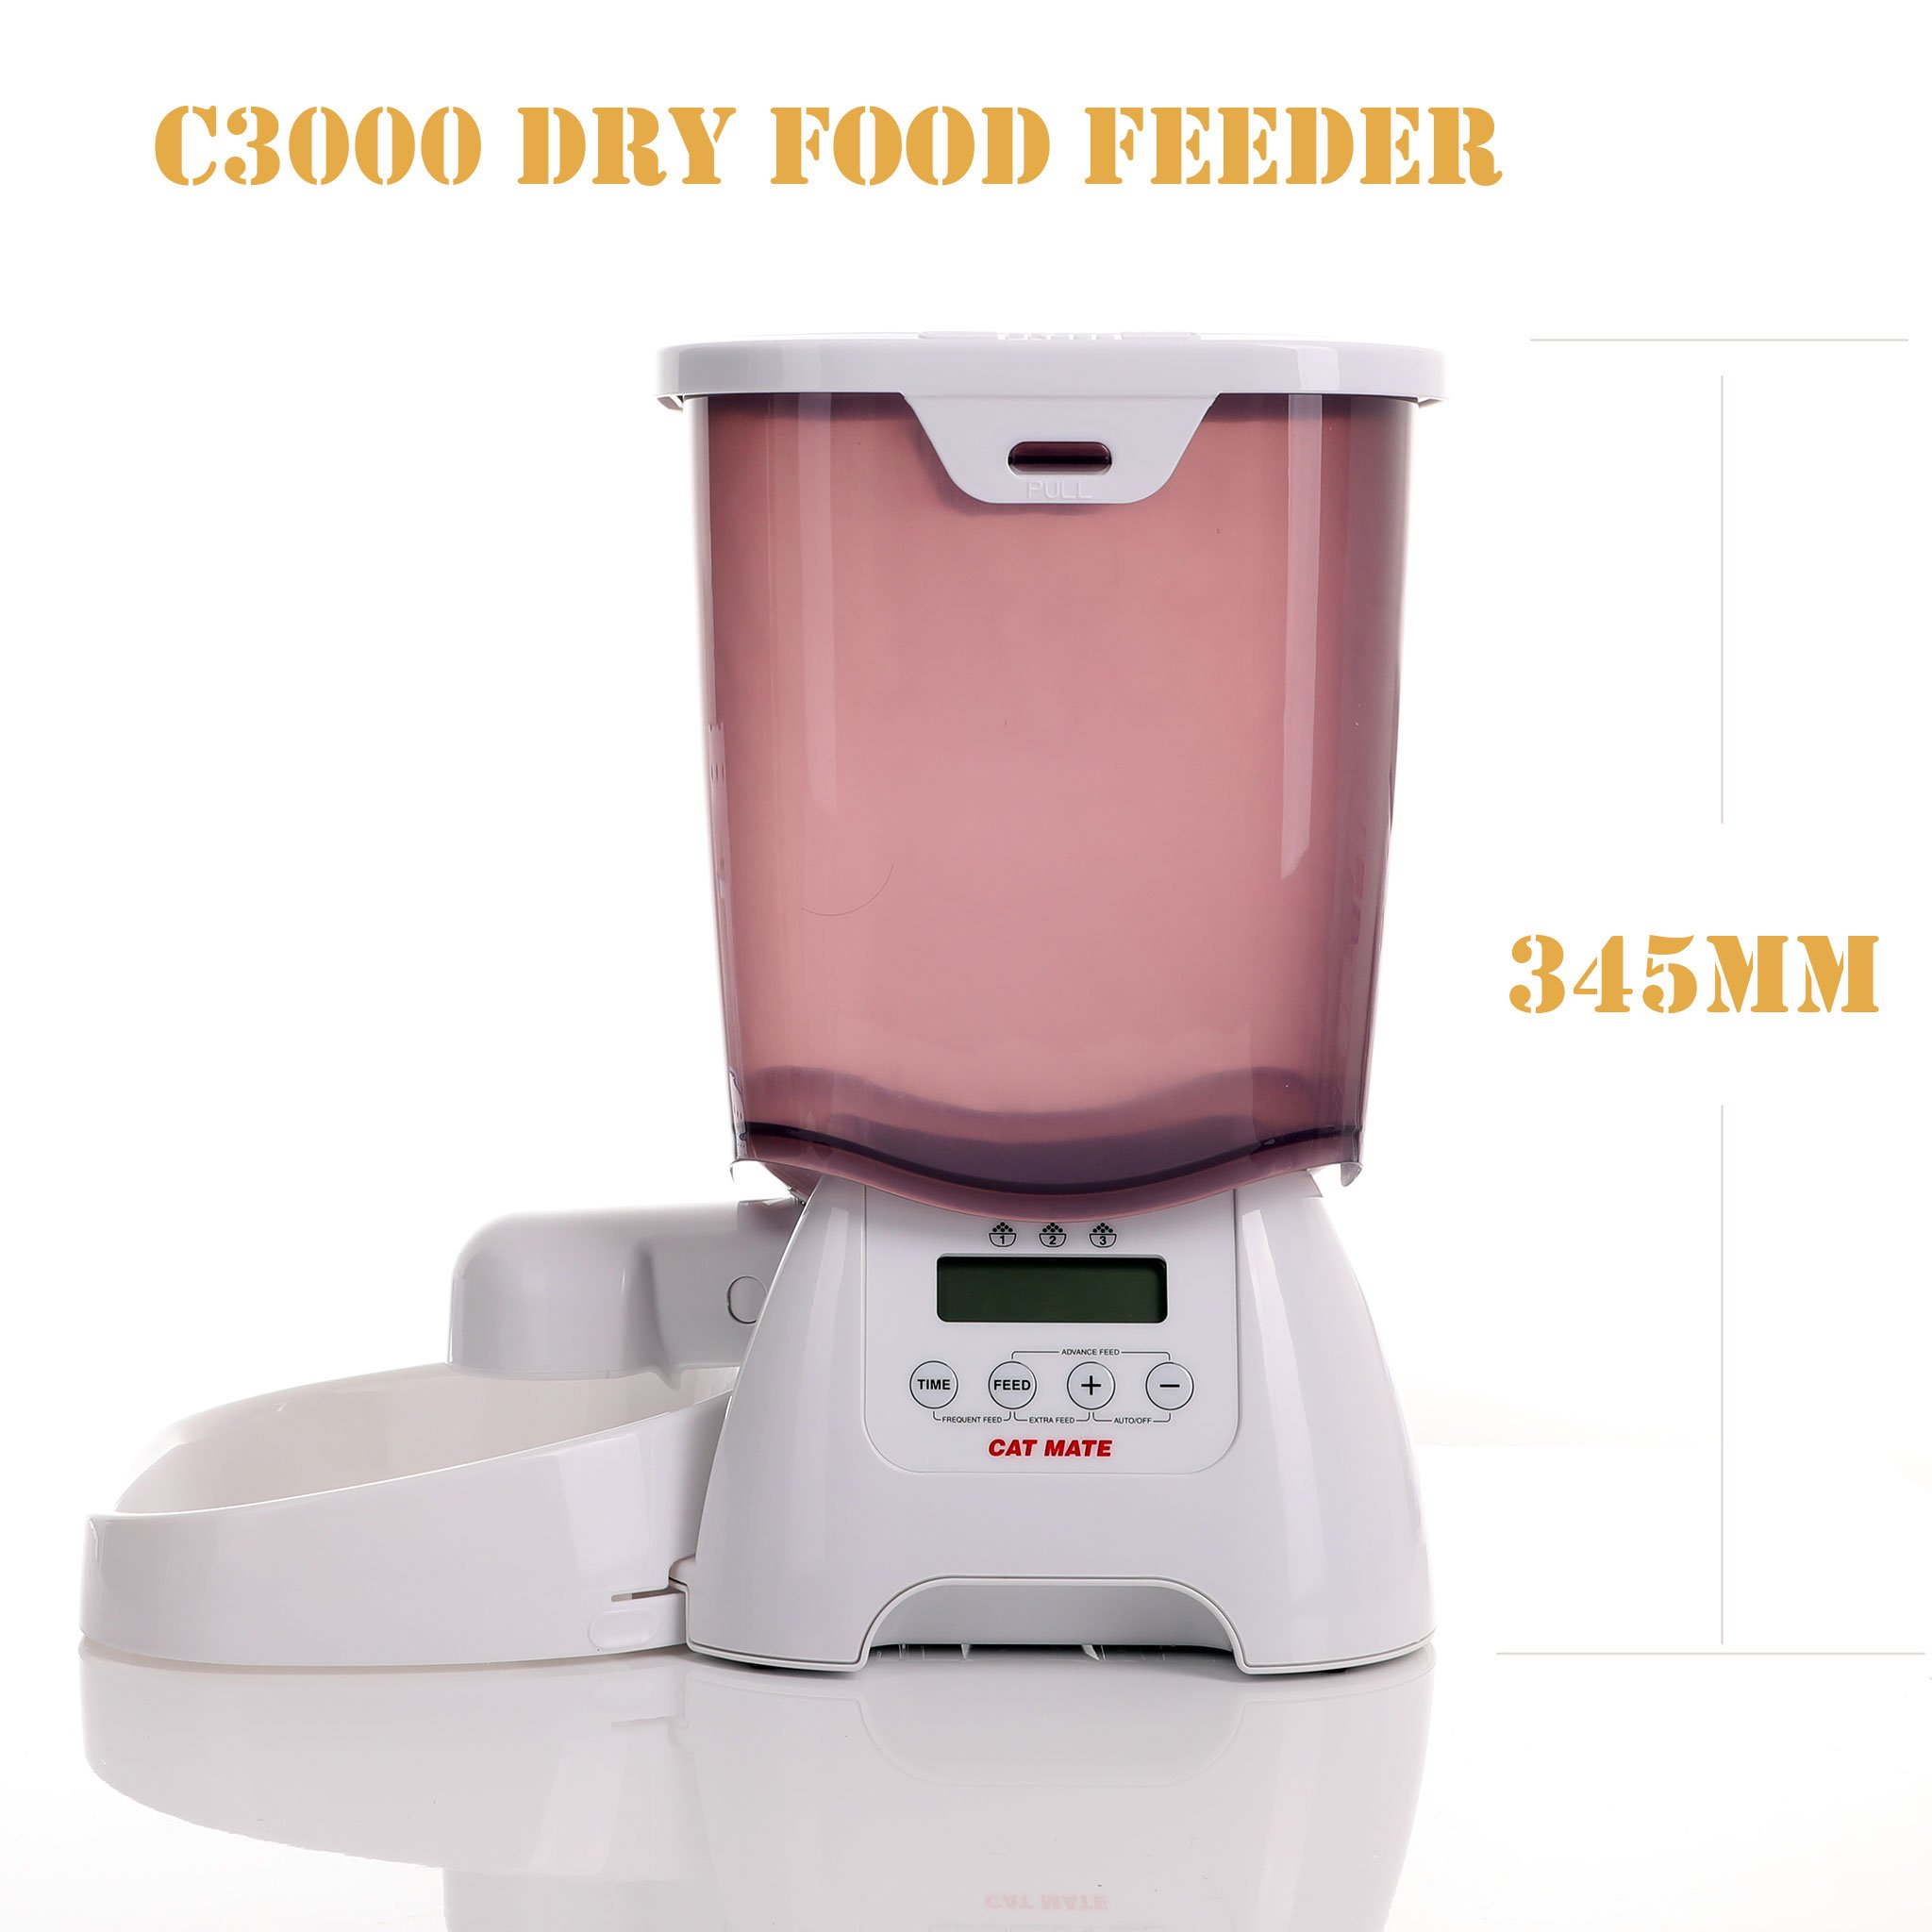 Designed to automatically provide dry food to cats and dogs.